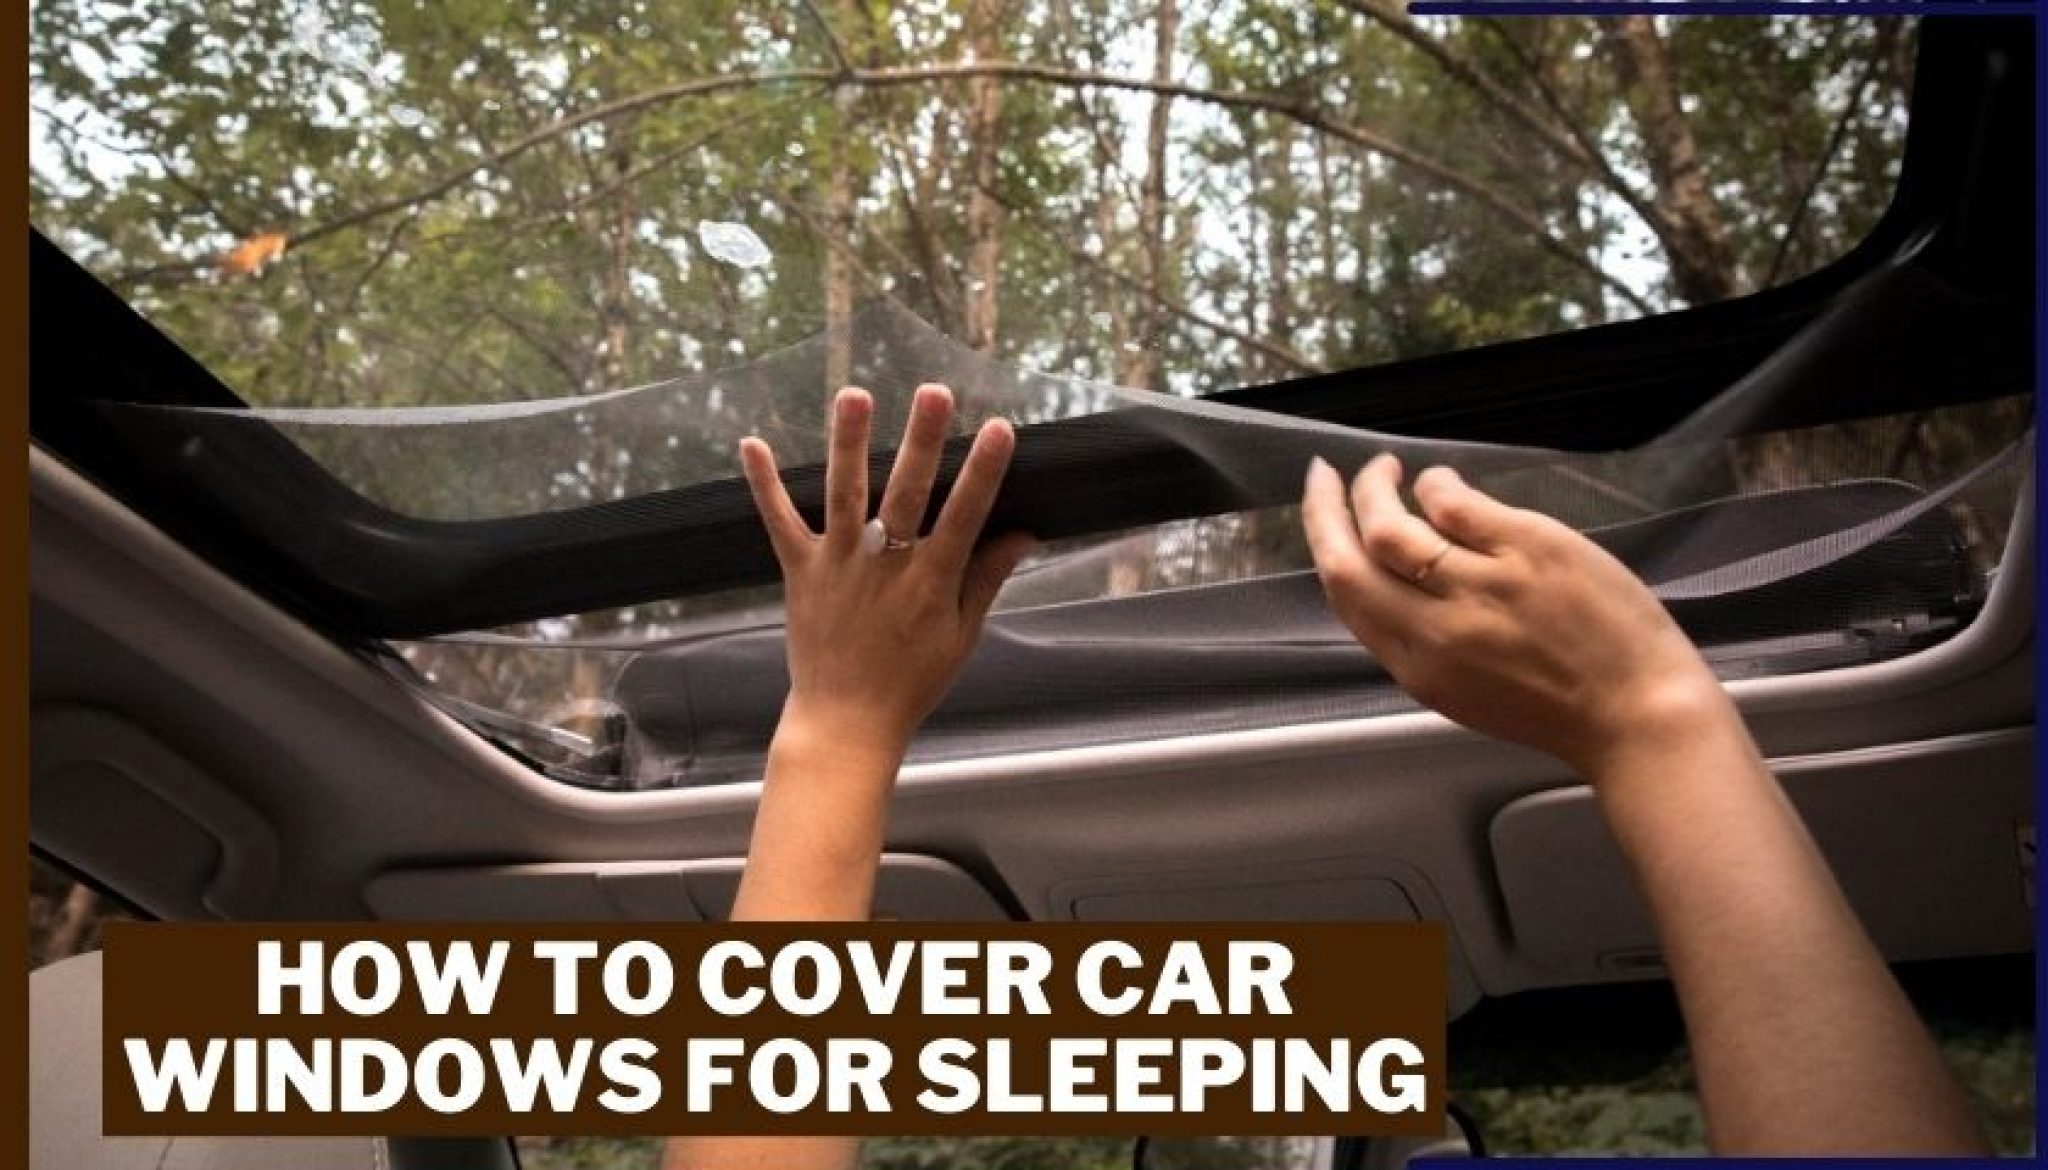 How To Cover Car Windows For Sleeping | Complete Guidelines